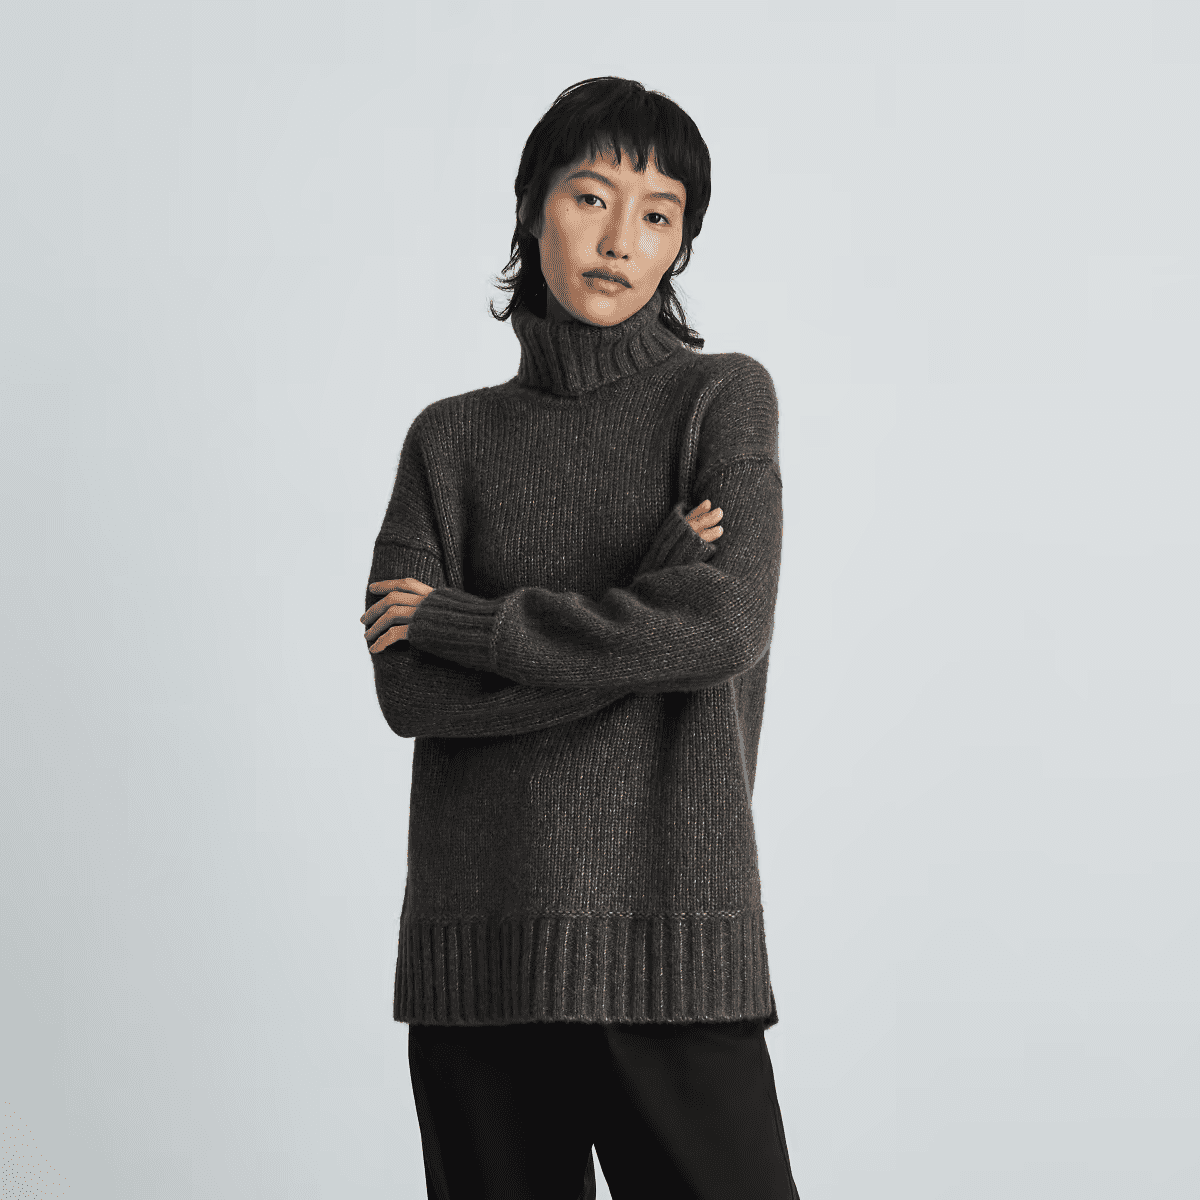 How to Get Cozy this Winter in Everlane’s Knits